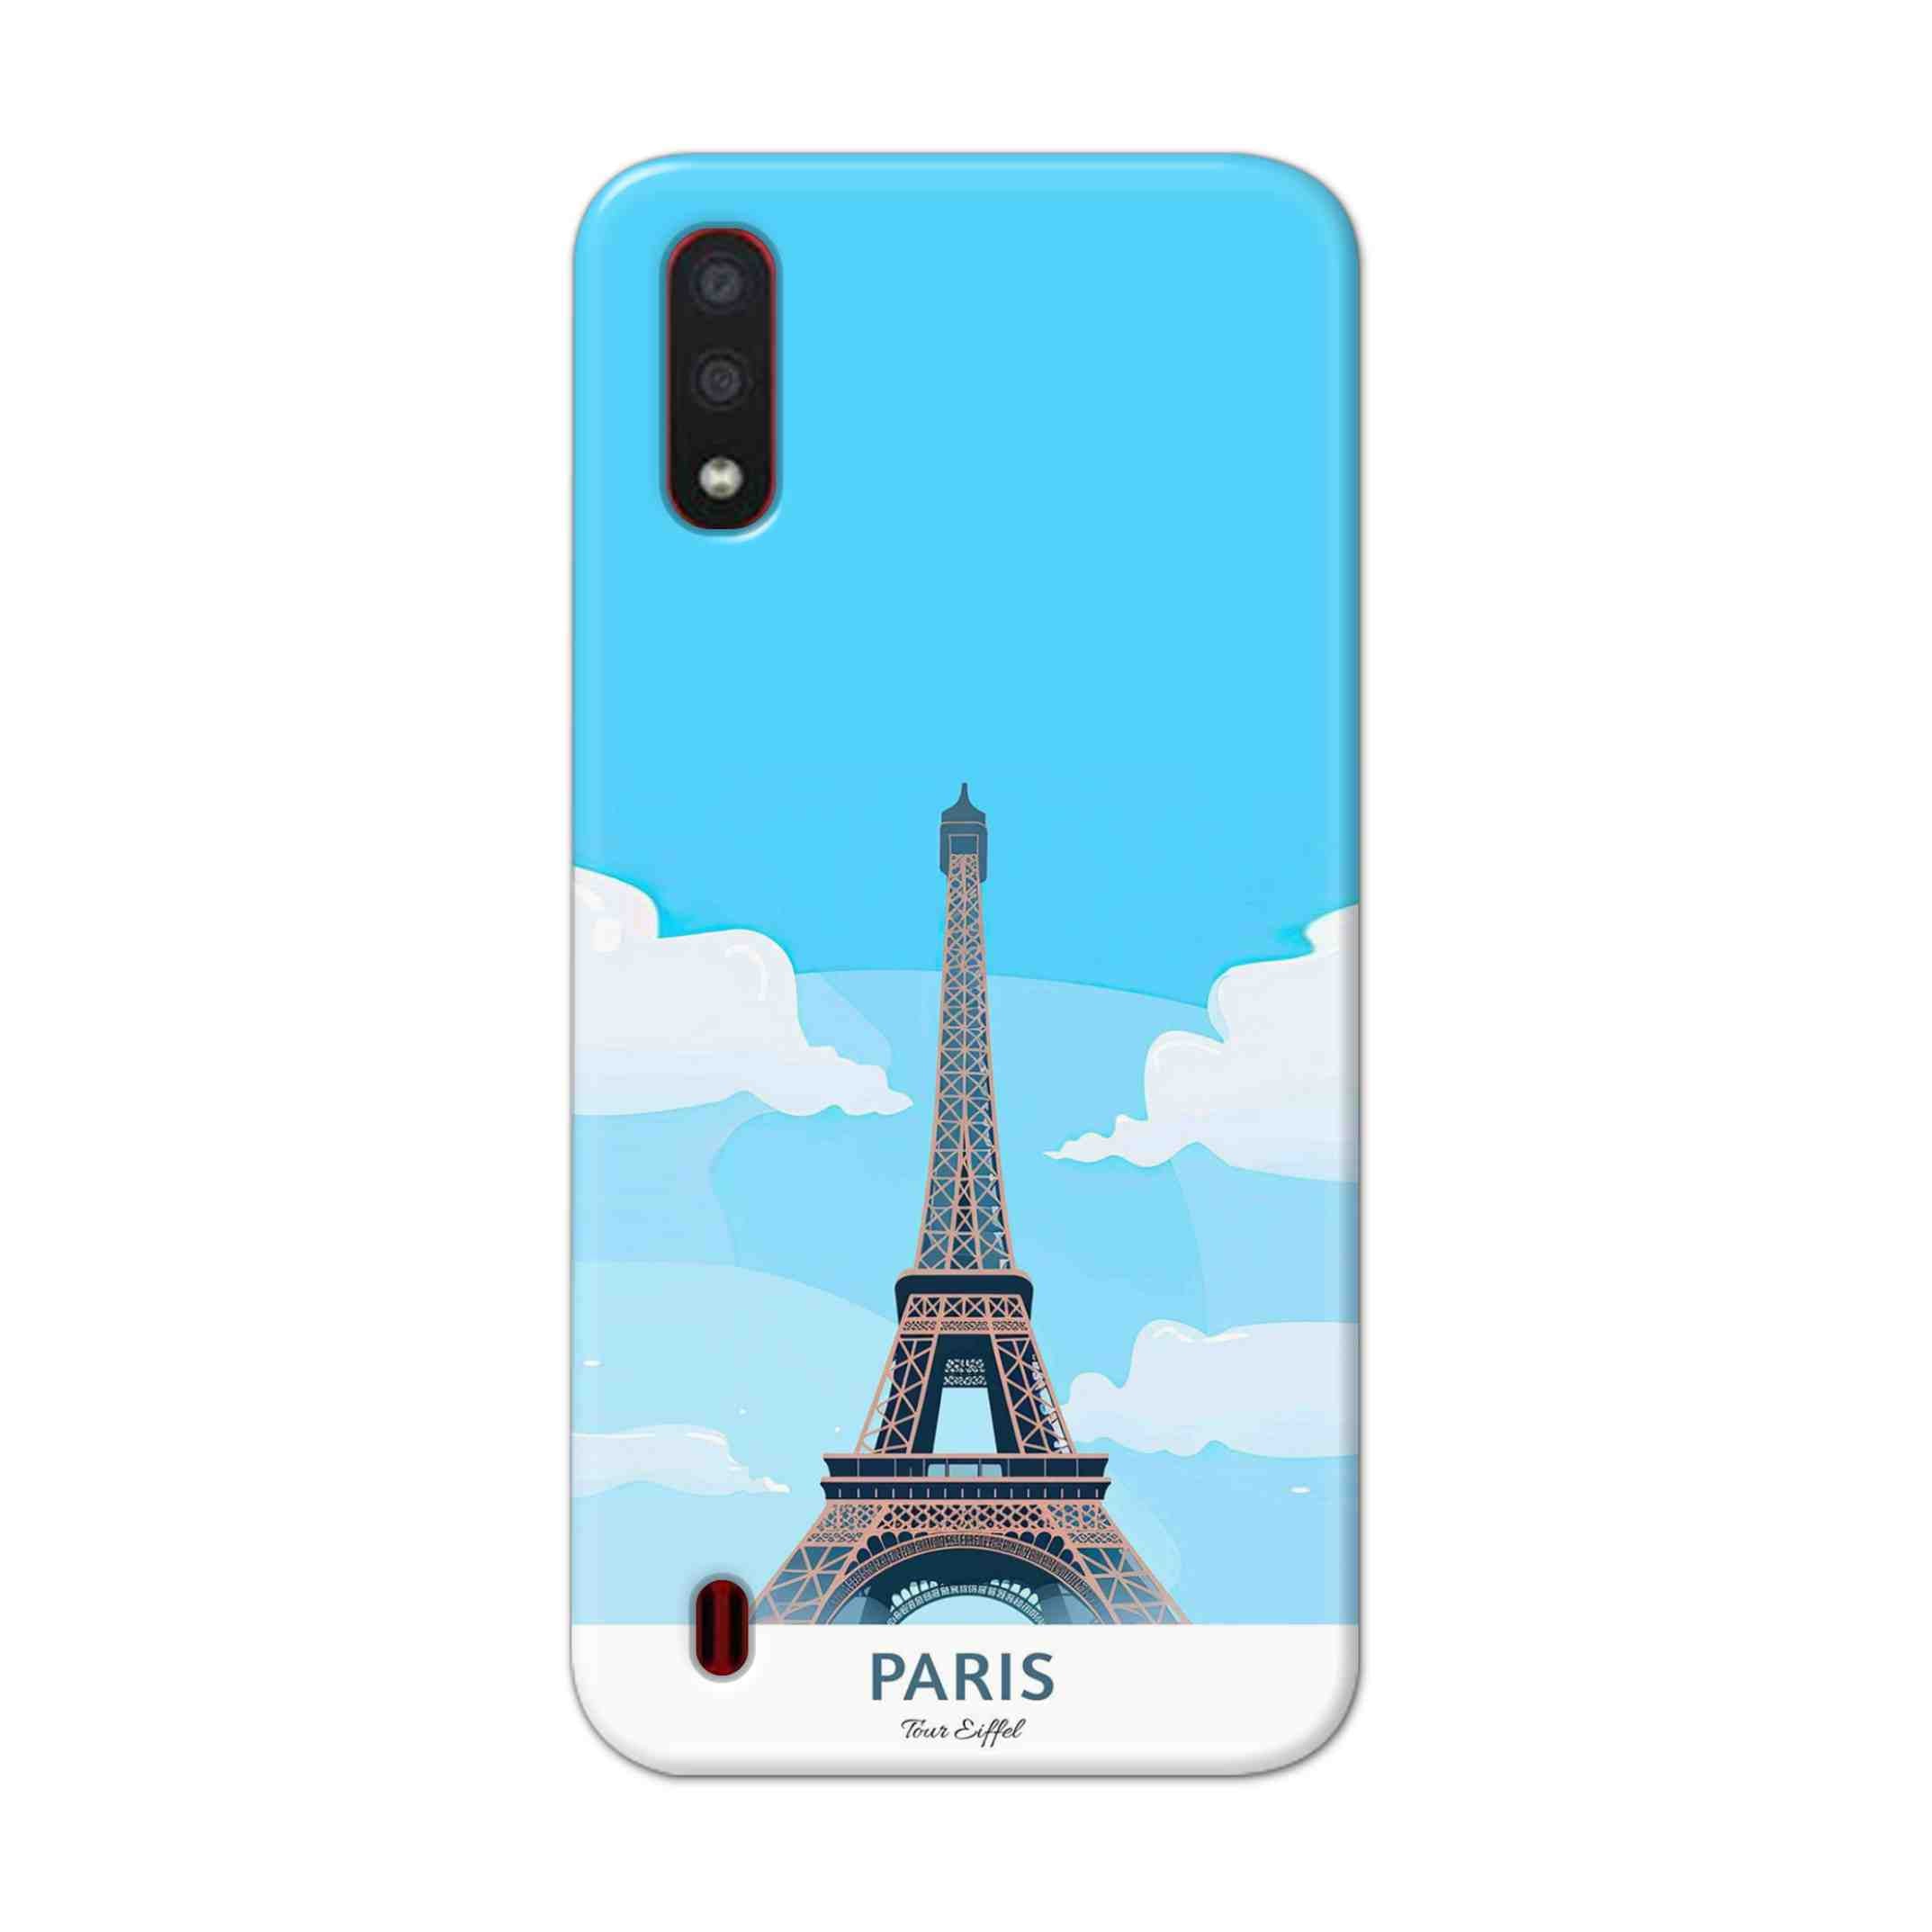 Buy Paris Hard Back Mobile Phone Case/Cover For Samsung Galaxy M01 Online